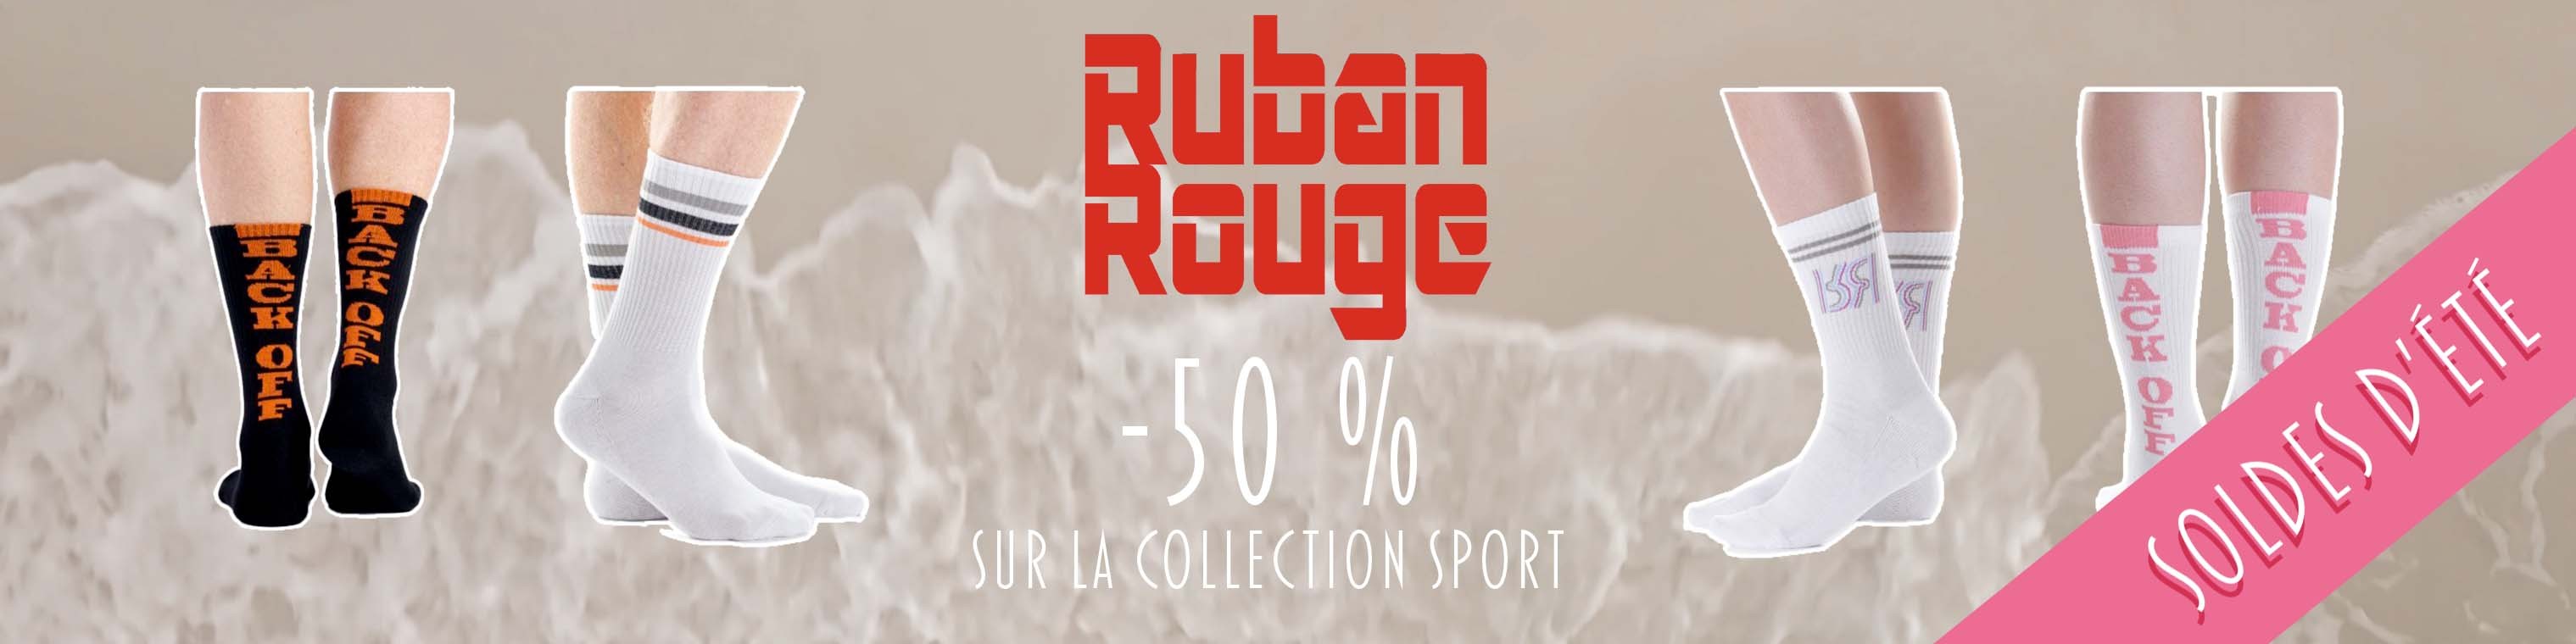 Soldes Ruban rouge article sport